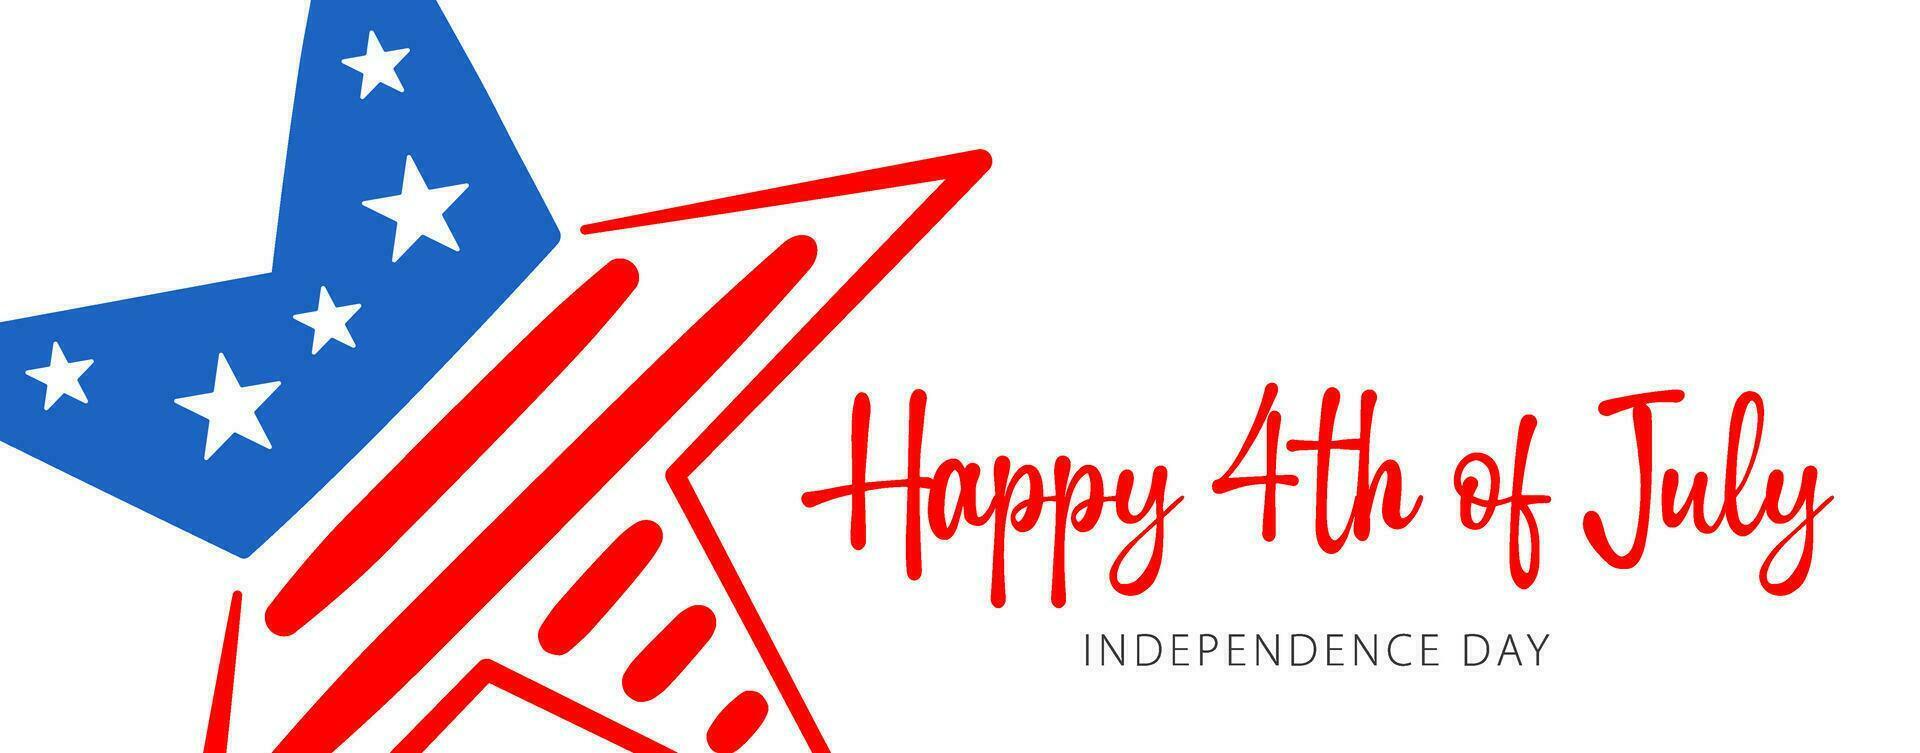 Happy 4th of July, Independence Day lettering and a star in colors of the USA flag. White background vector